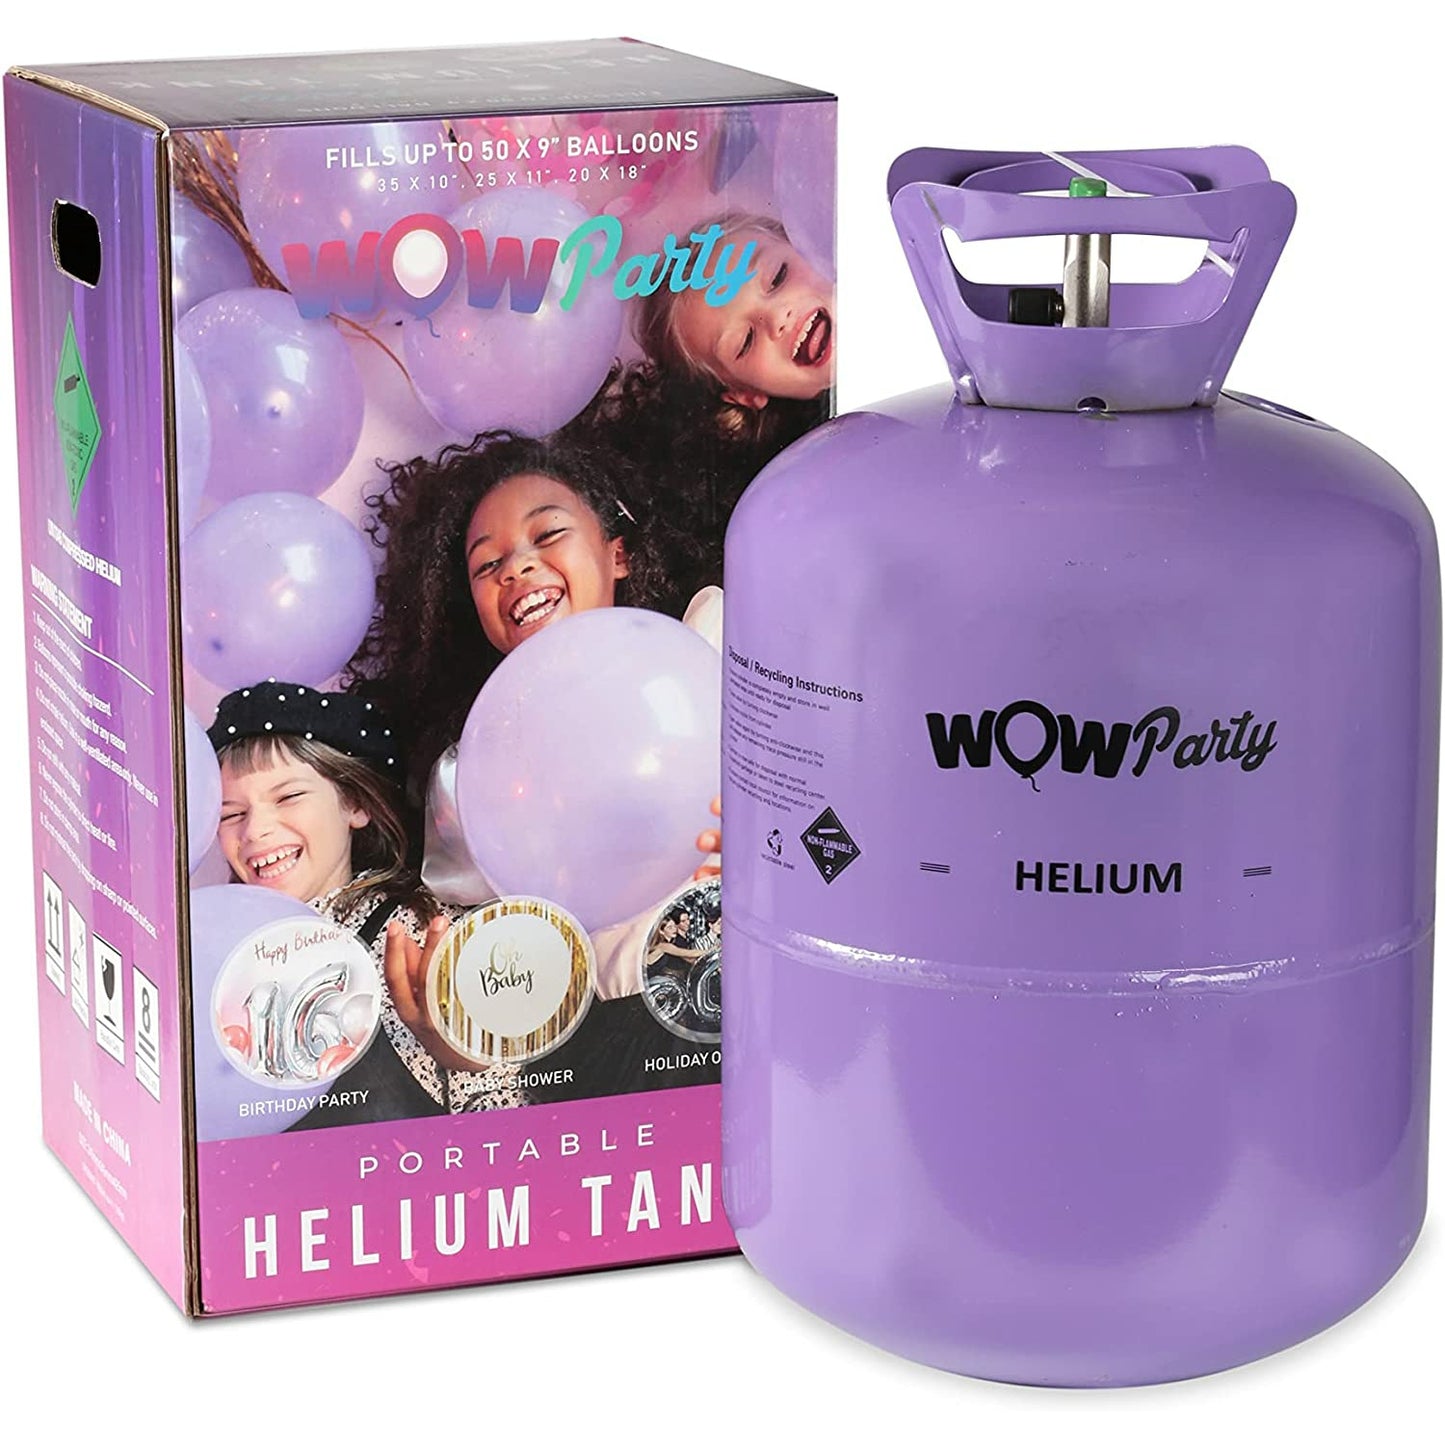 Helium Canister Tank - 50 x 9 inch Balloons